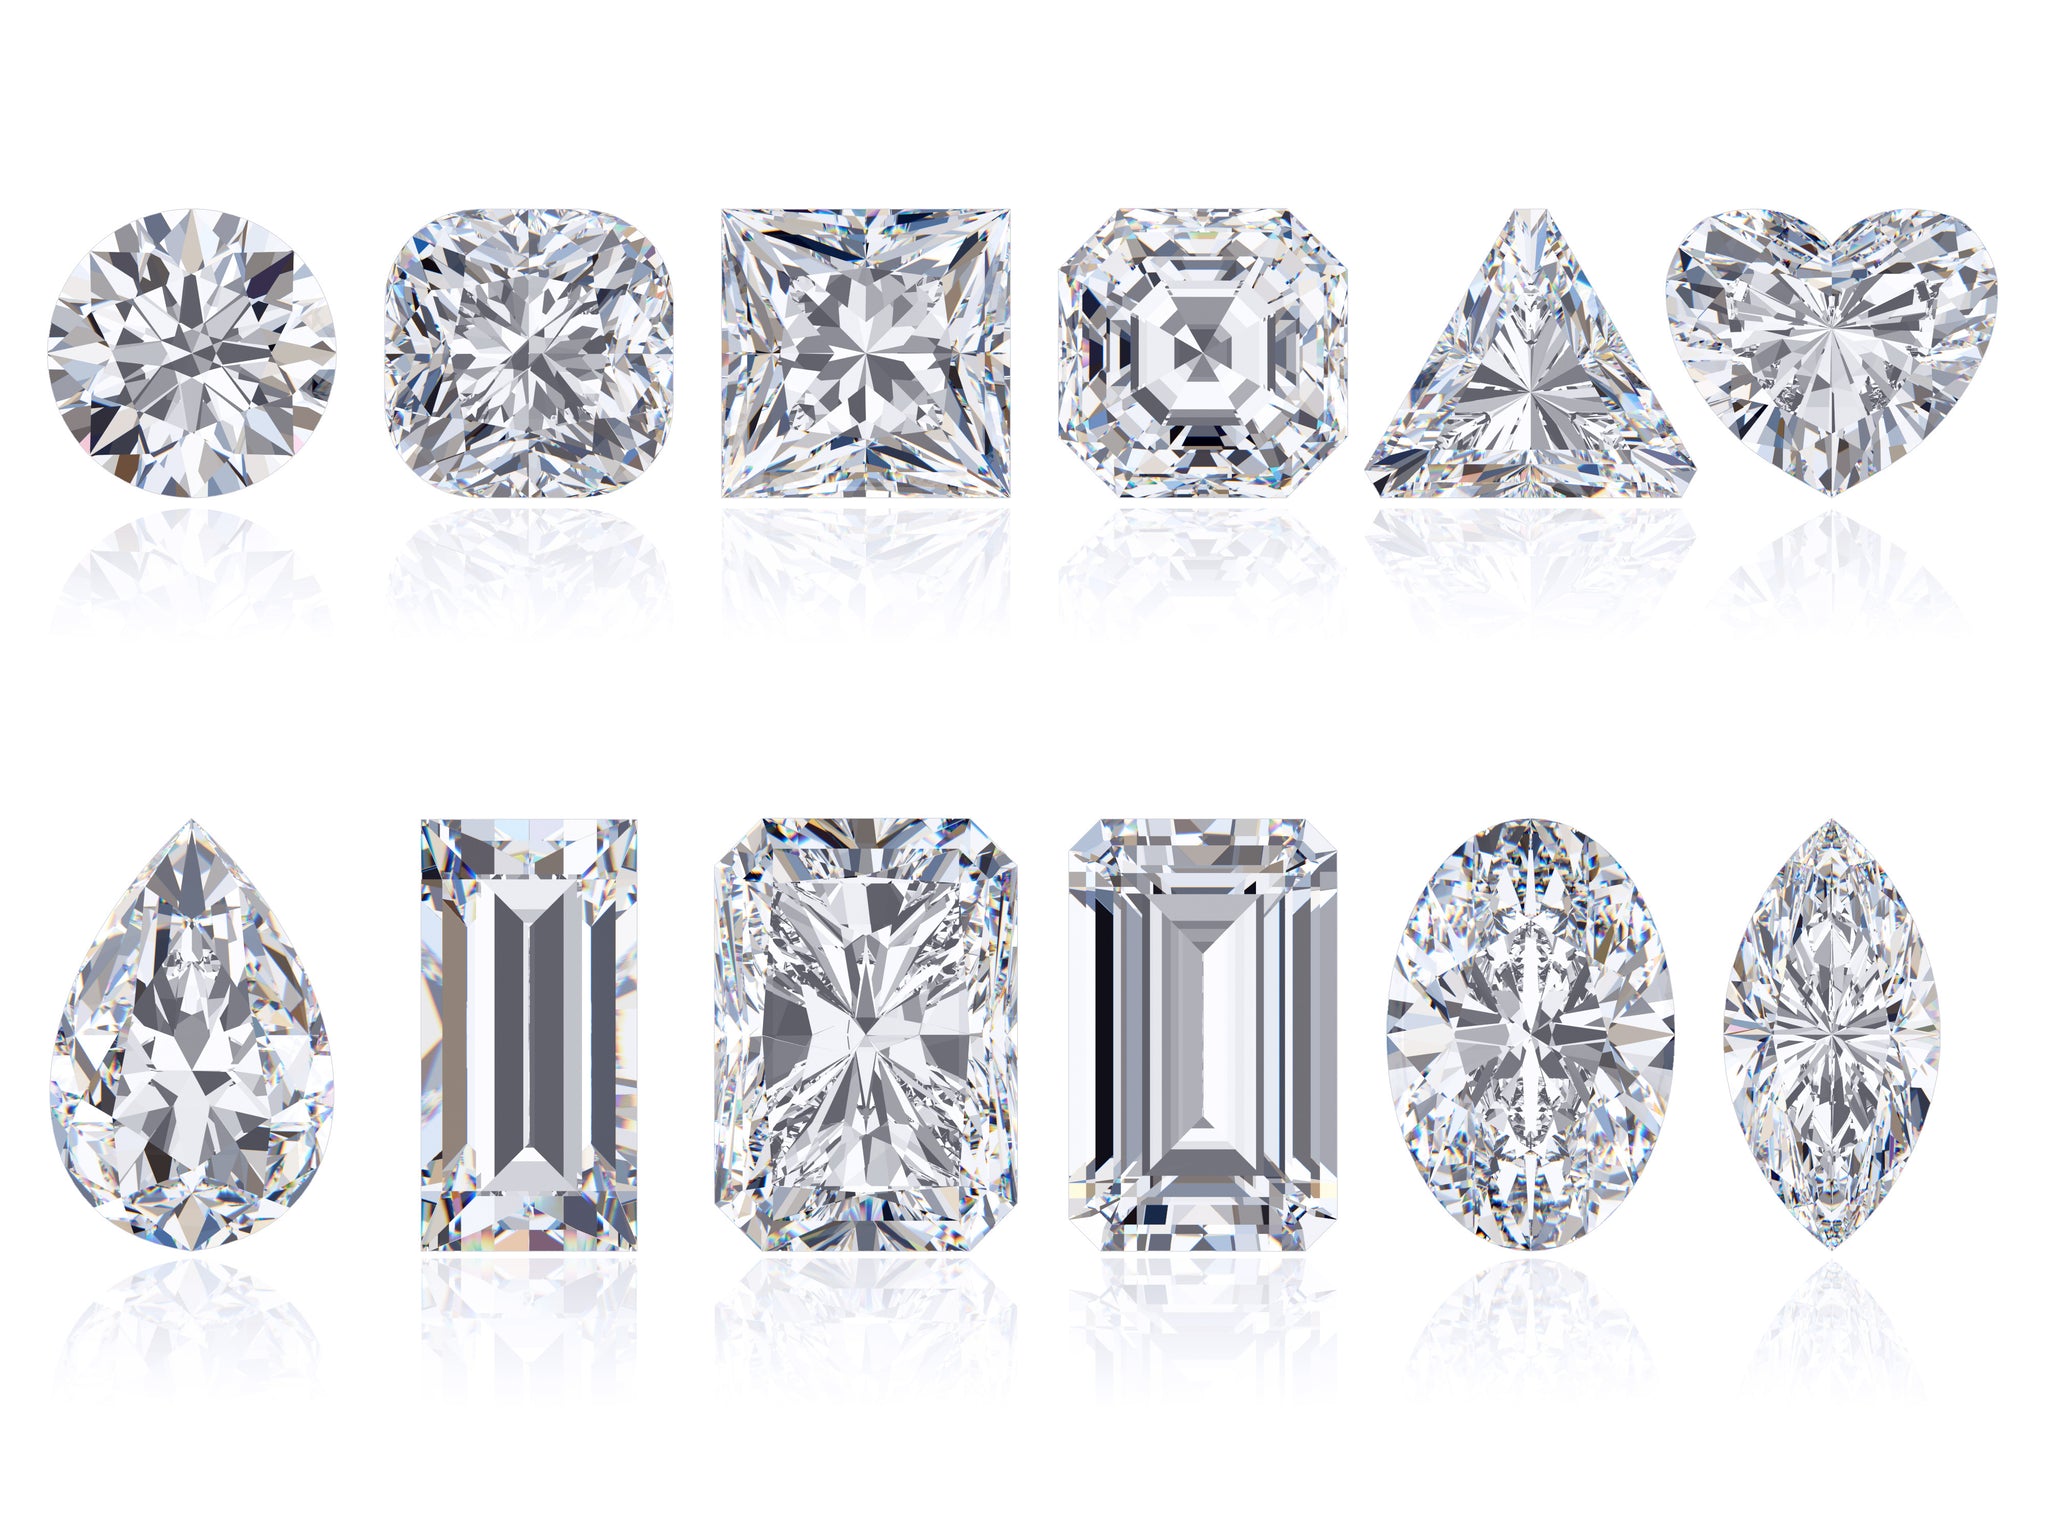 How does the diamond industry decide prices?